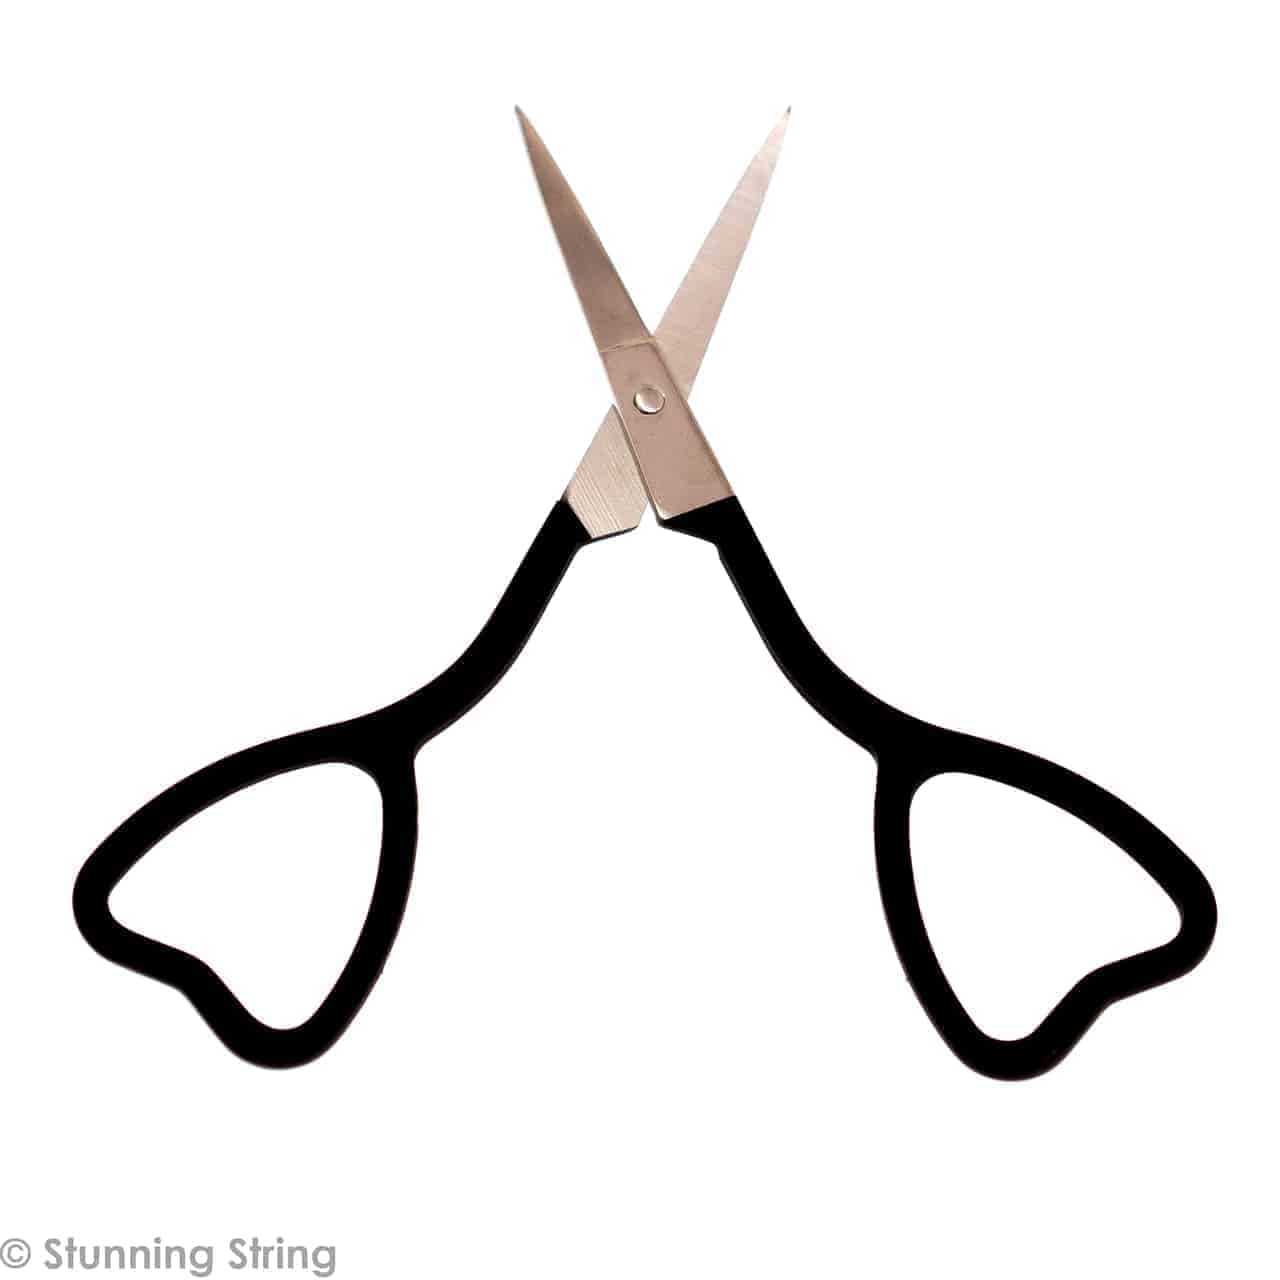 https://www.stunningstring.com/wp-content/uploads/2019/08/products-Heart_Scissors_Open__05647.1539035248.1280.1280.png